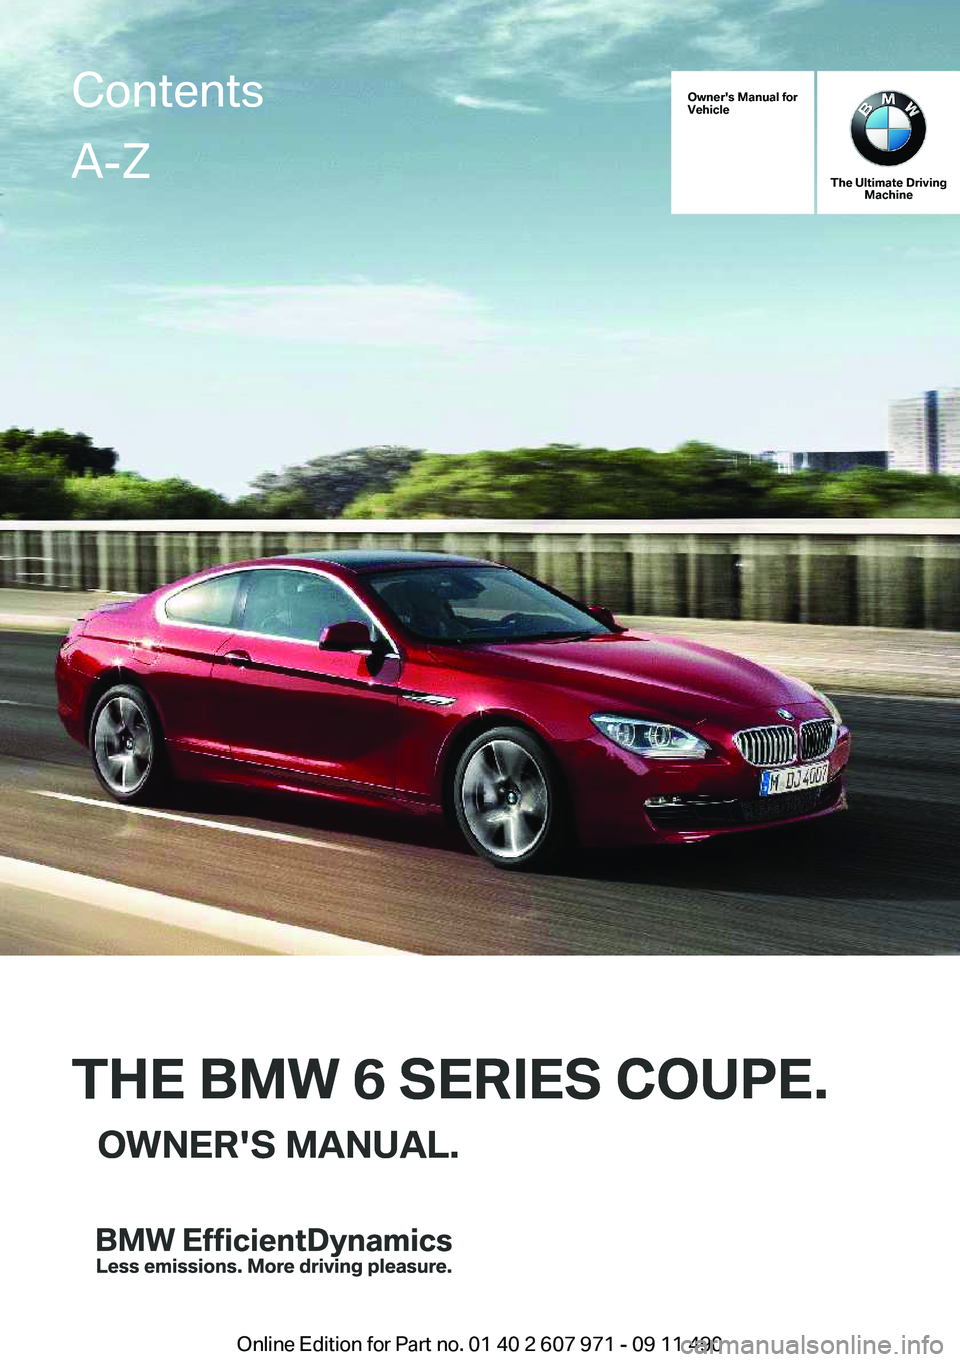 BMW 640I COUPE 2012  Owners Manual Owner's Manual for
Vehicle
THE BMW 6 SERIES COUPE.OWNER'S MANUAL.
The Ultimate Driving Machine
THE BMW 6 SERIES COUPE.OWNER'S MANUAL.
ContentsA-Z
Online Edition for Part no. 01 40 2 607 97